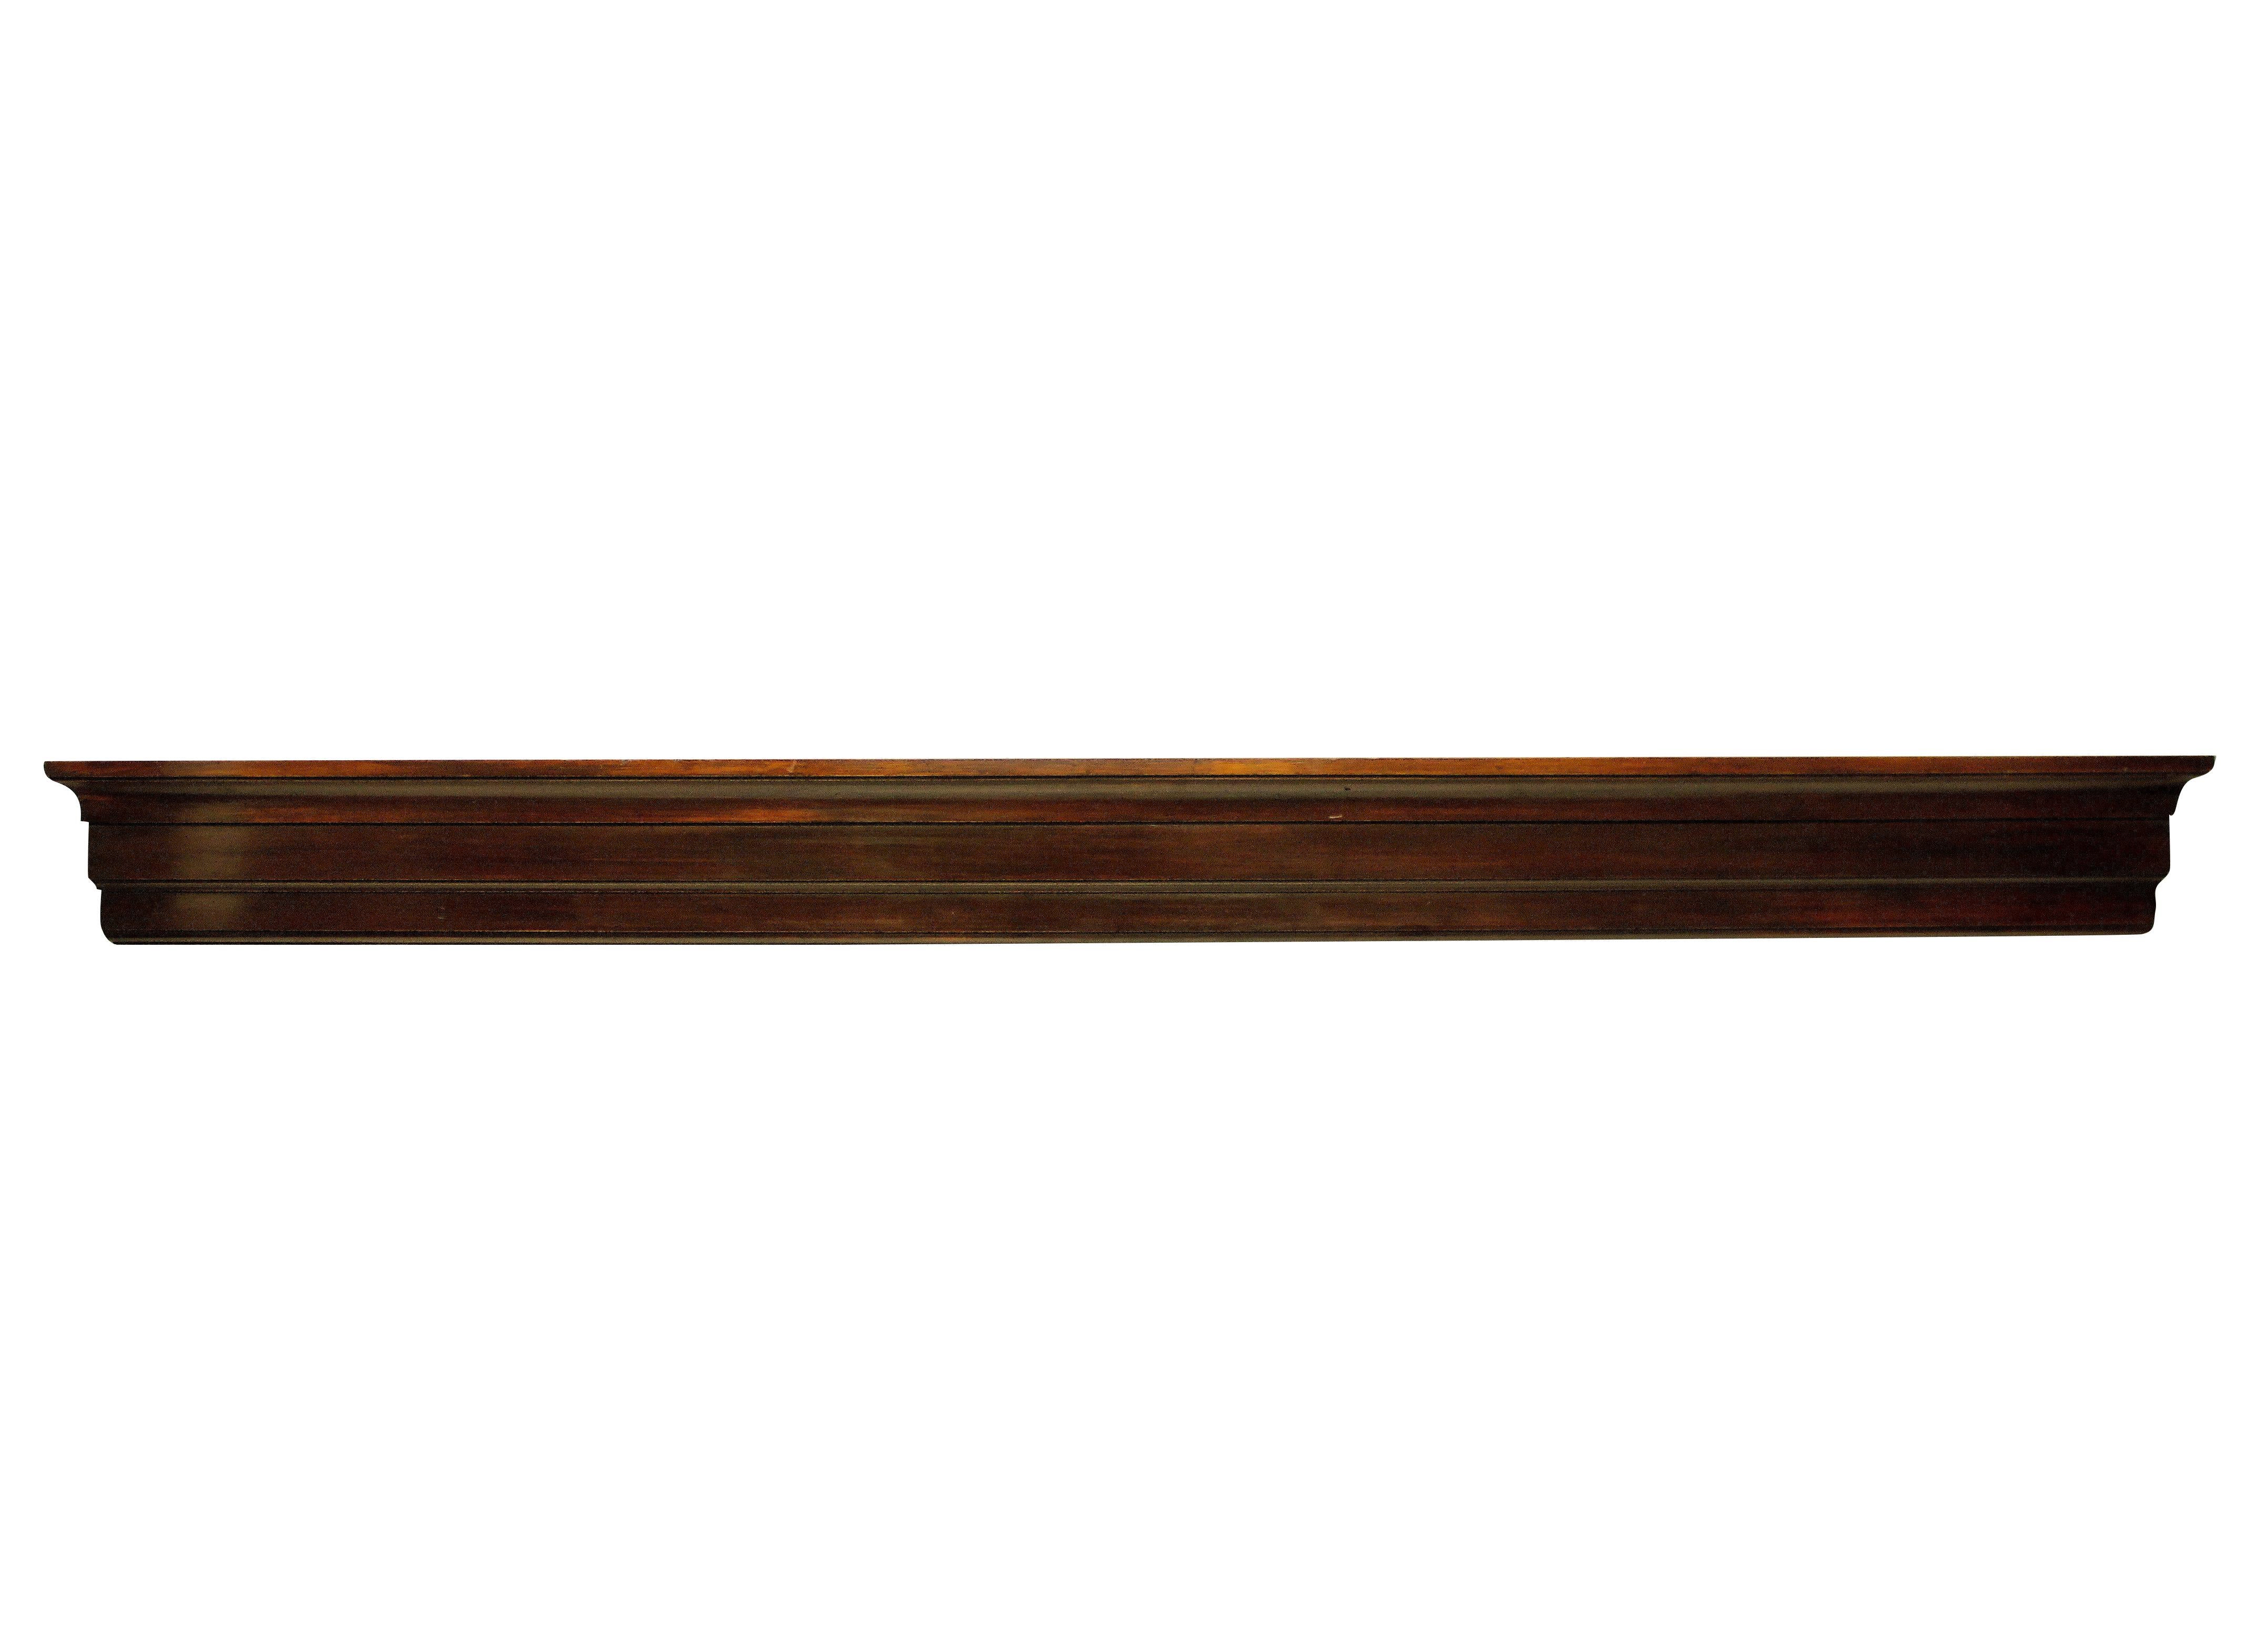 A rare opportunity to own a piece of furniture designed by Sir Edwin Lutyens.
This pair of pelmets were designed by Lutyens for the billiard room of Papillon Hall in 1903. Of simple linear form, made from carved and lacquered mahogany. The house